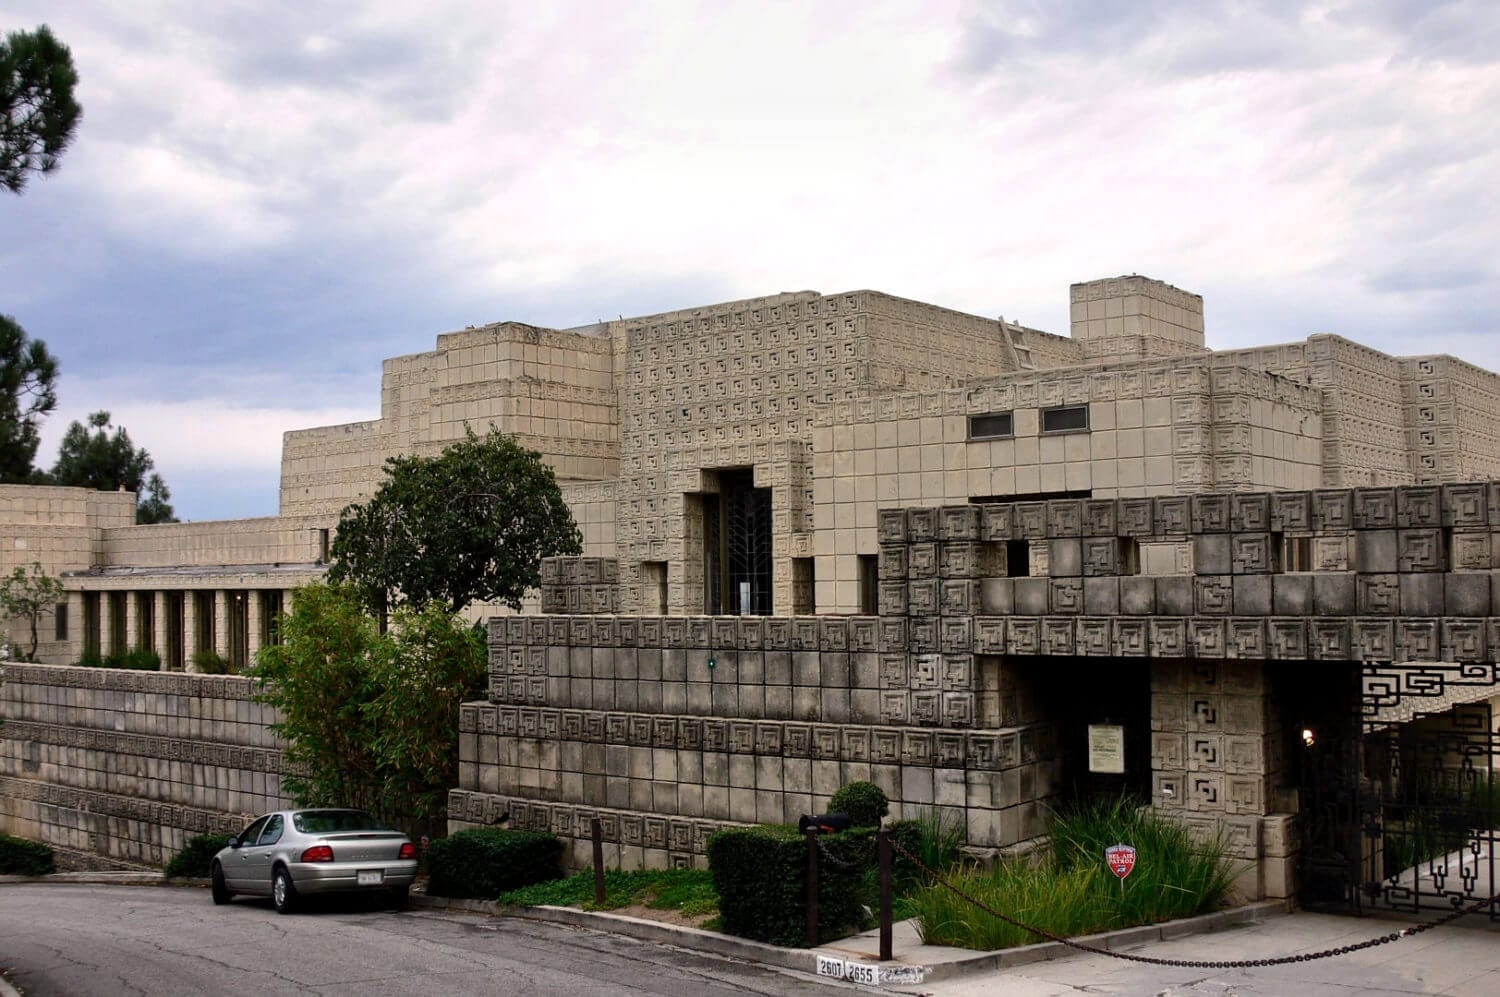 Ennis House - Wikimedia Commons photo by Mike Dillon